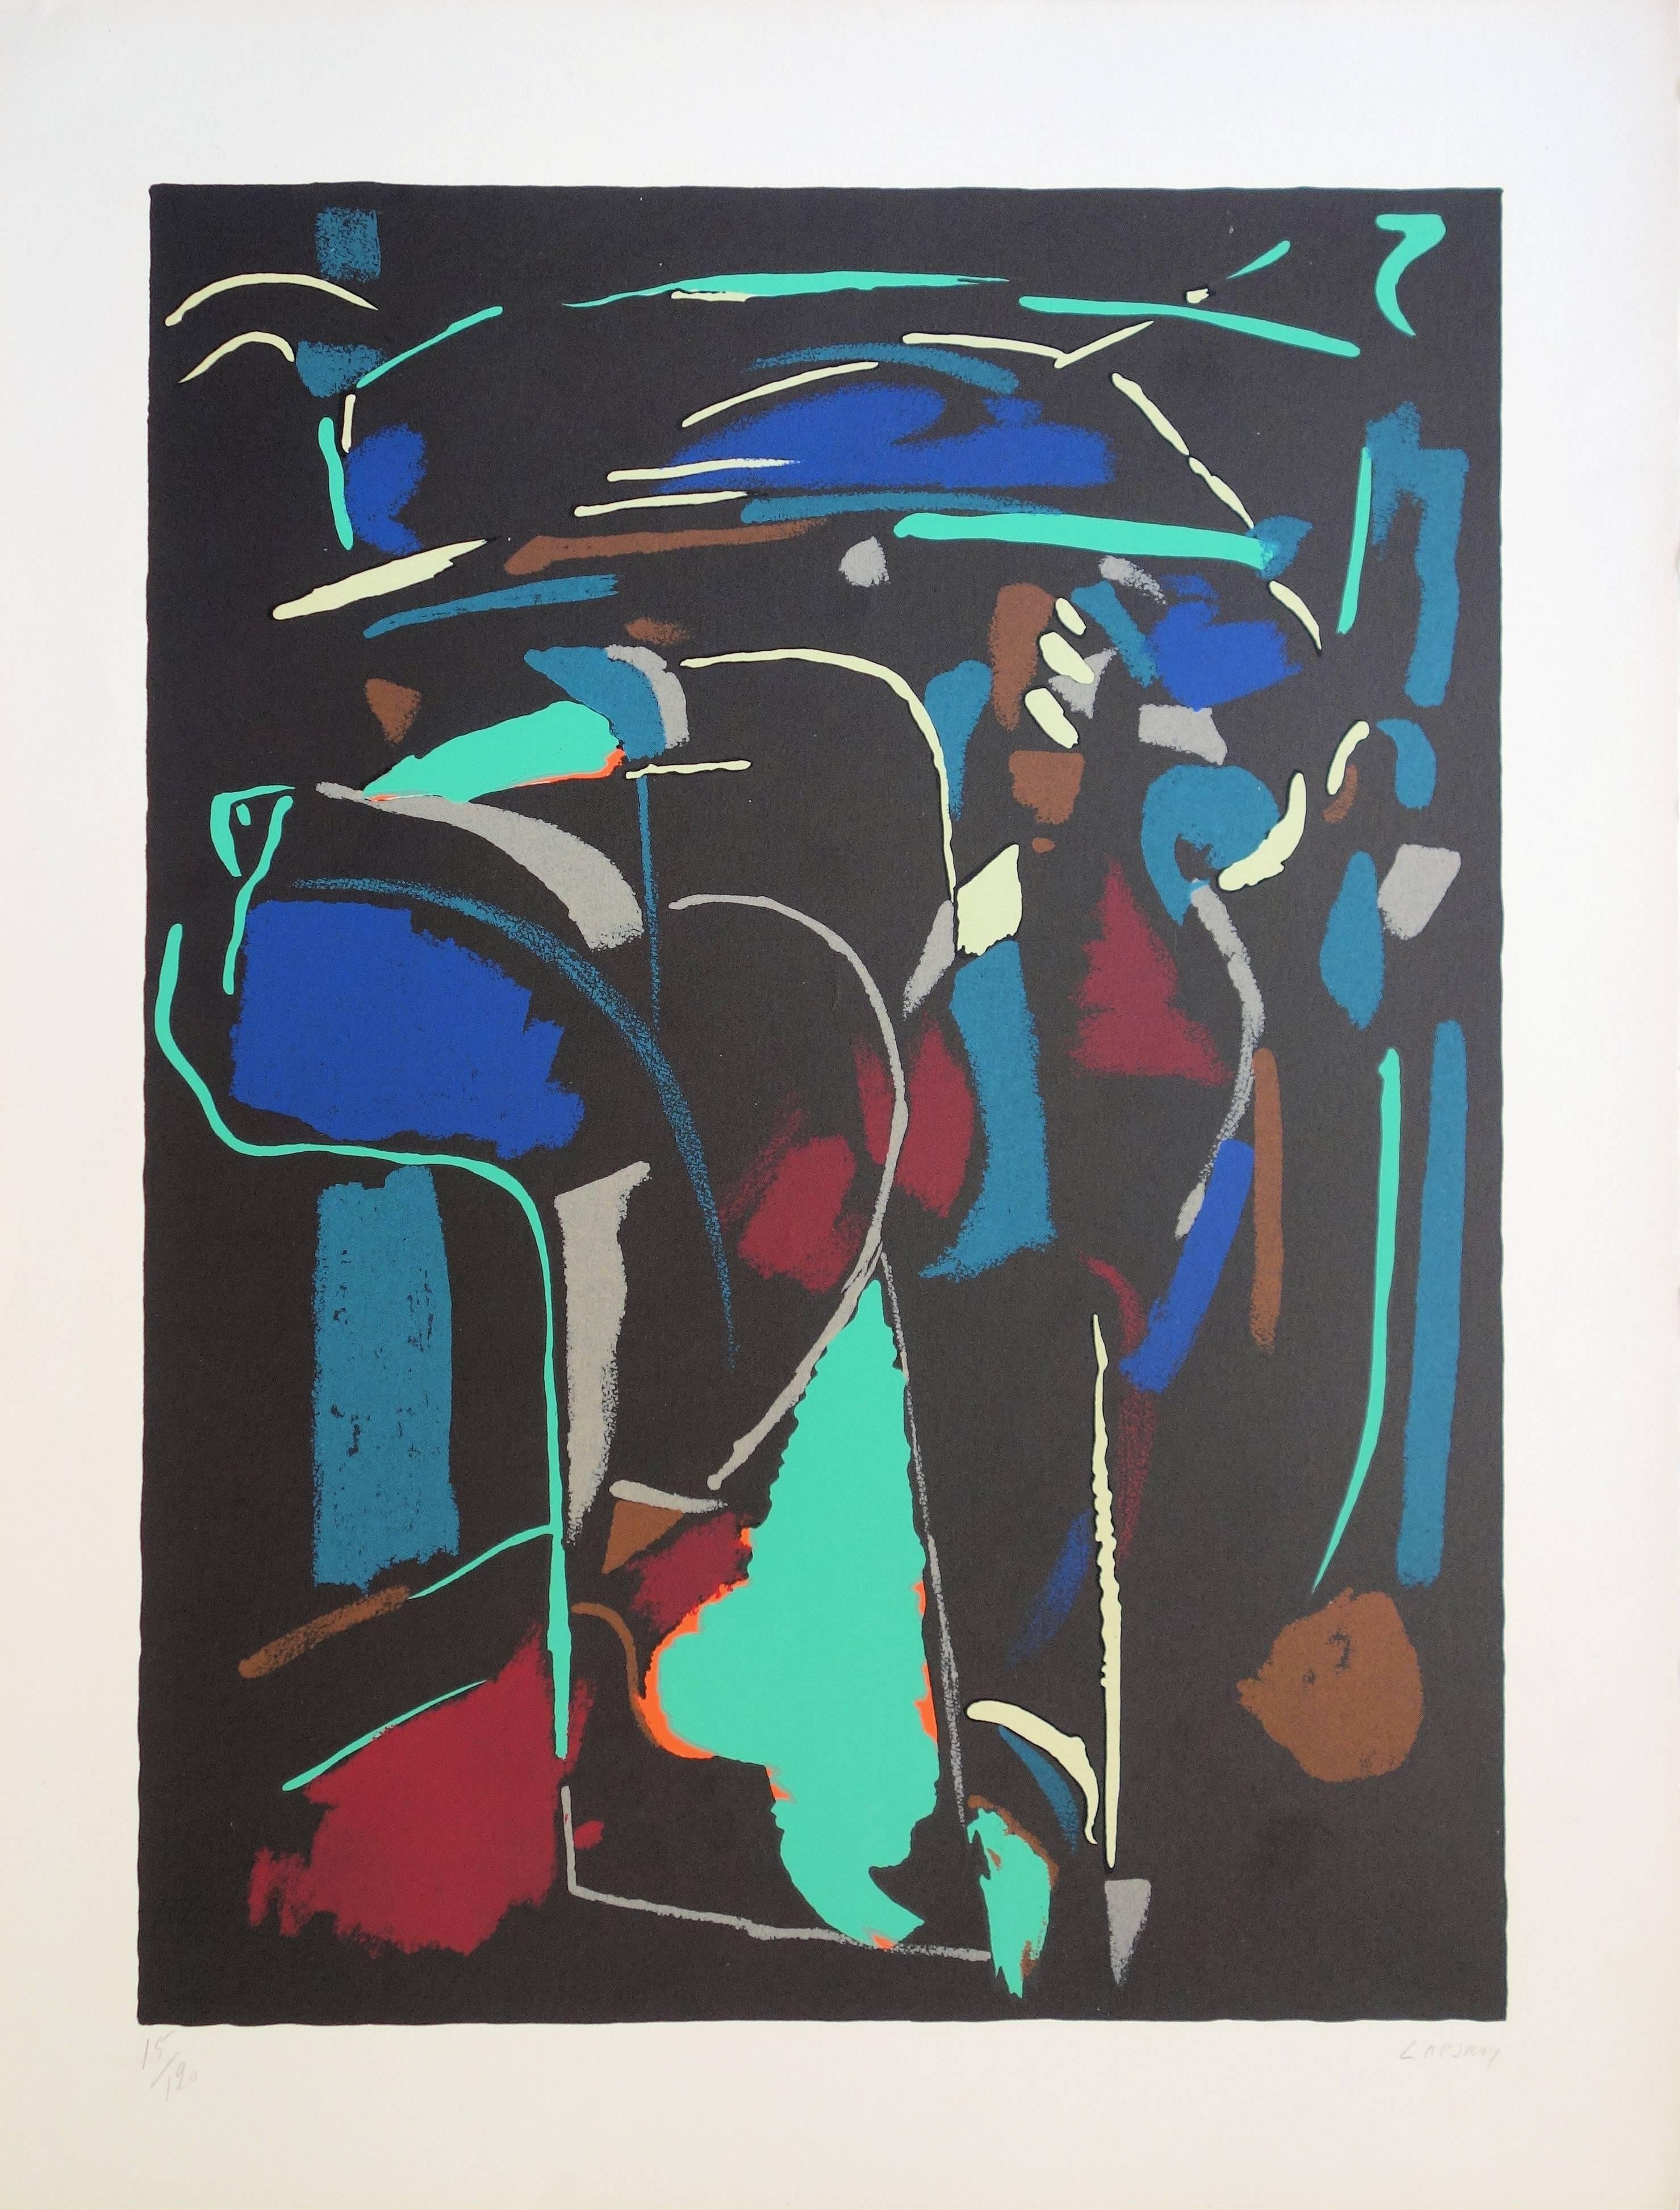 André Lanskoy Abstract Print - Abstract Composition on Black Background - Original handsigned lithograph